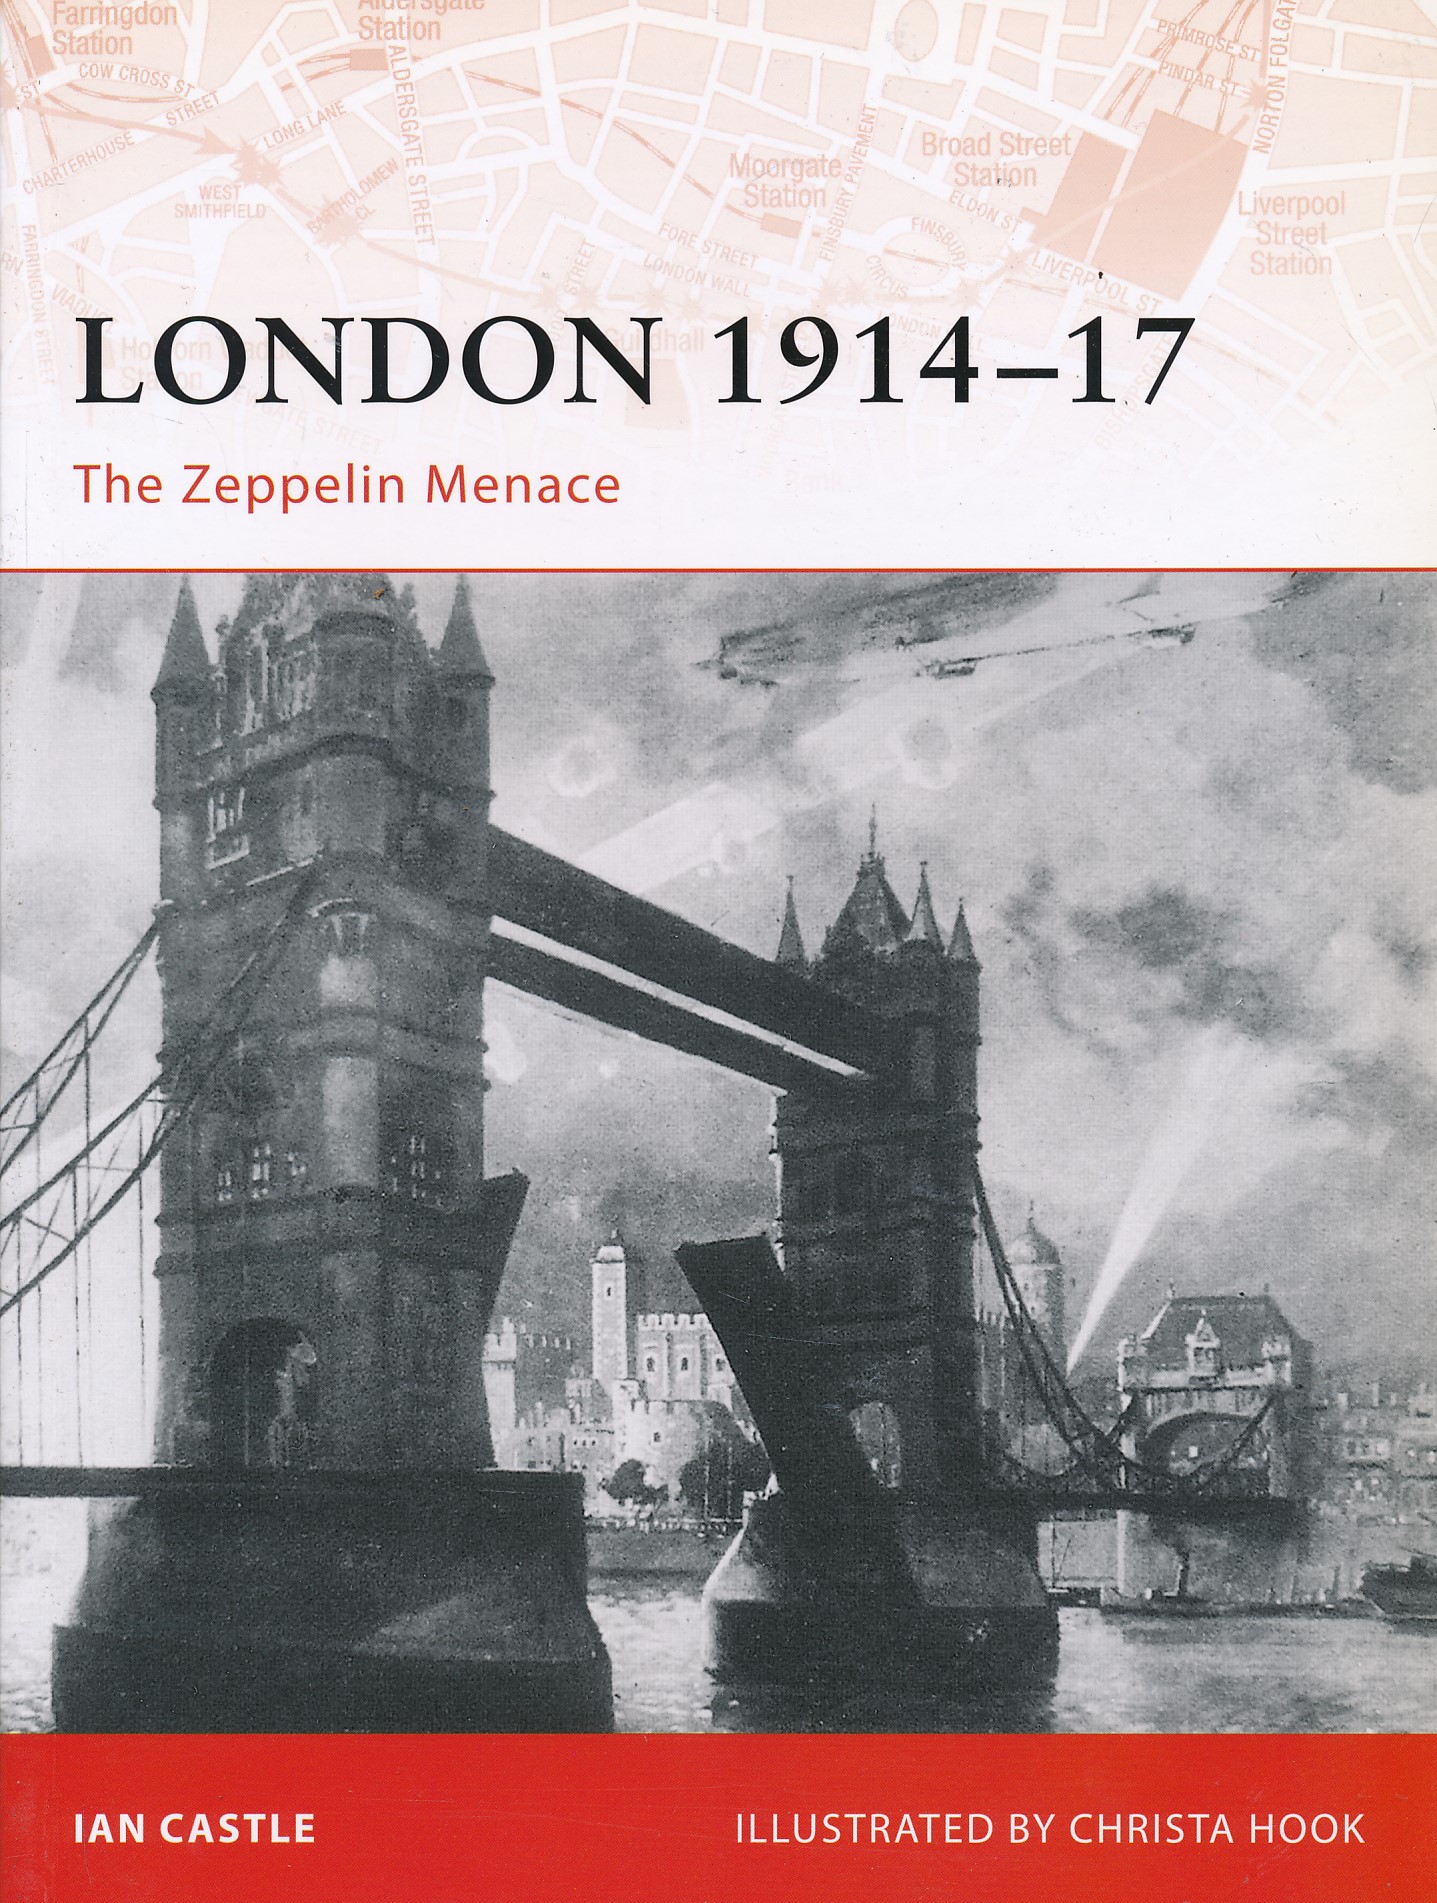 London 1914-17. The Zeppelin Menace. Osprey Military History Campaign series No. 193.